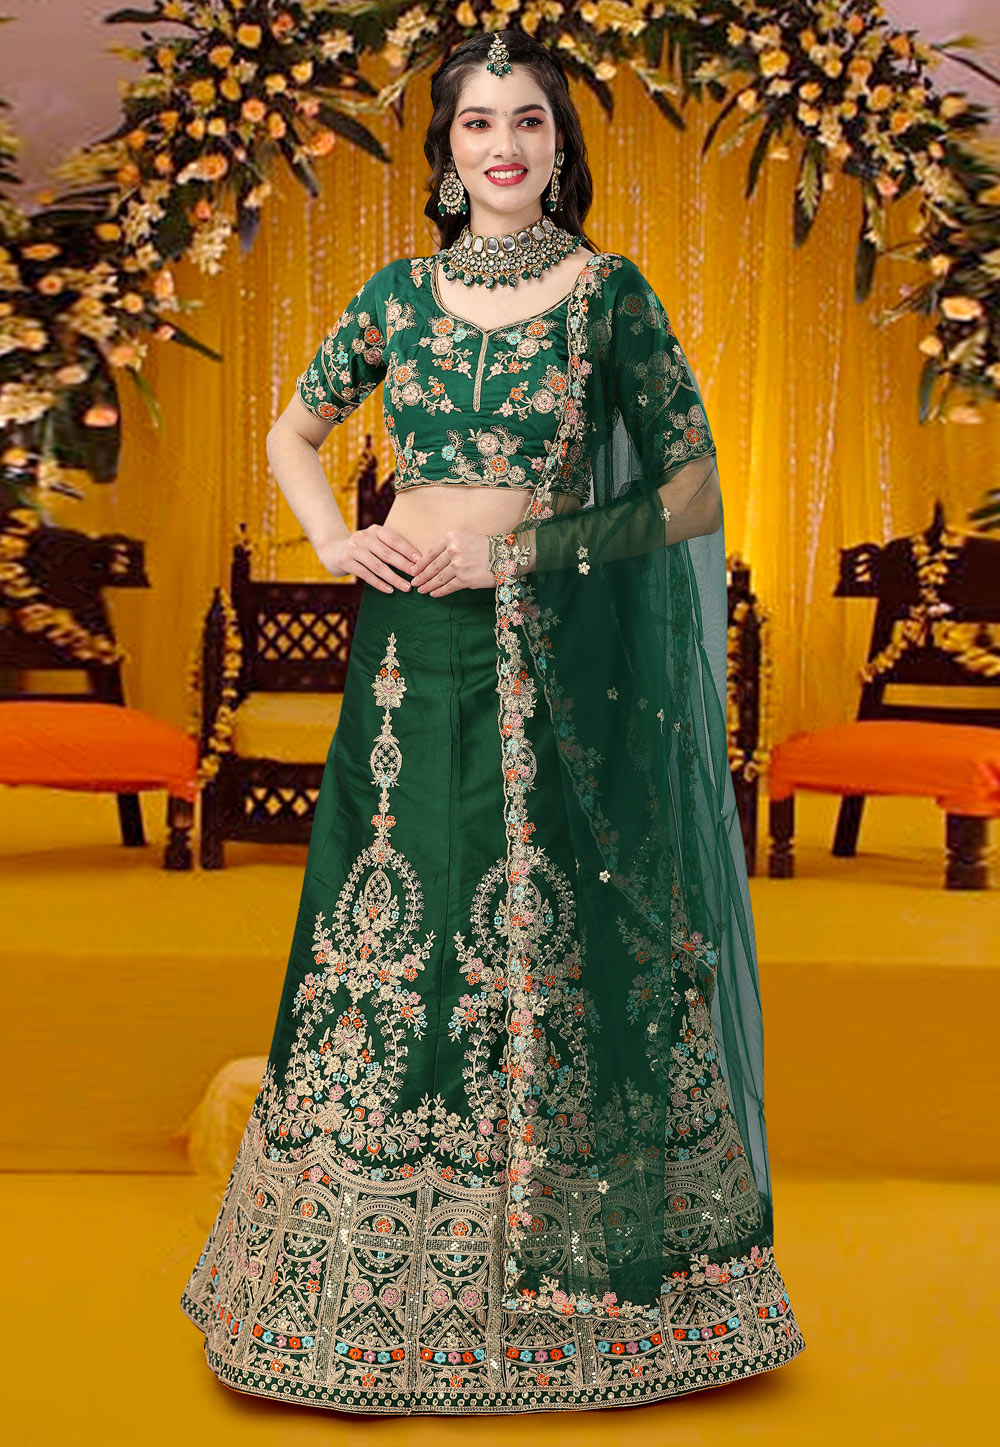 Bottle Green Floral Printed Lehenga Set with Embroidered Blouse and Gold  Embellishments - Seasons India